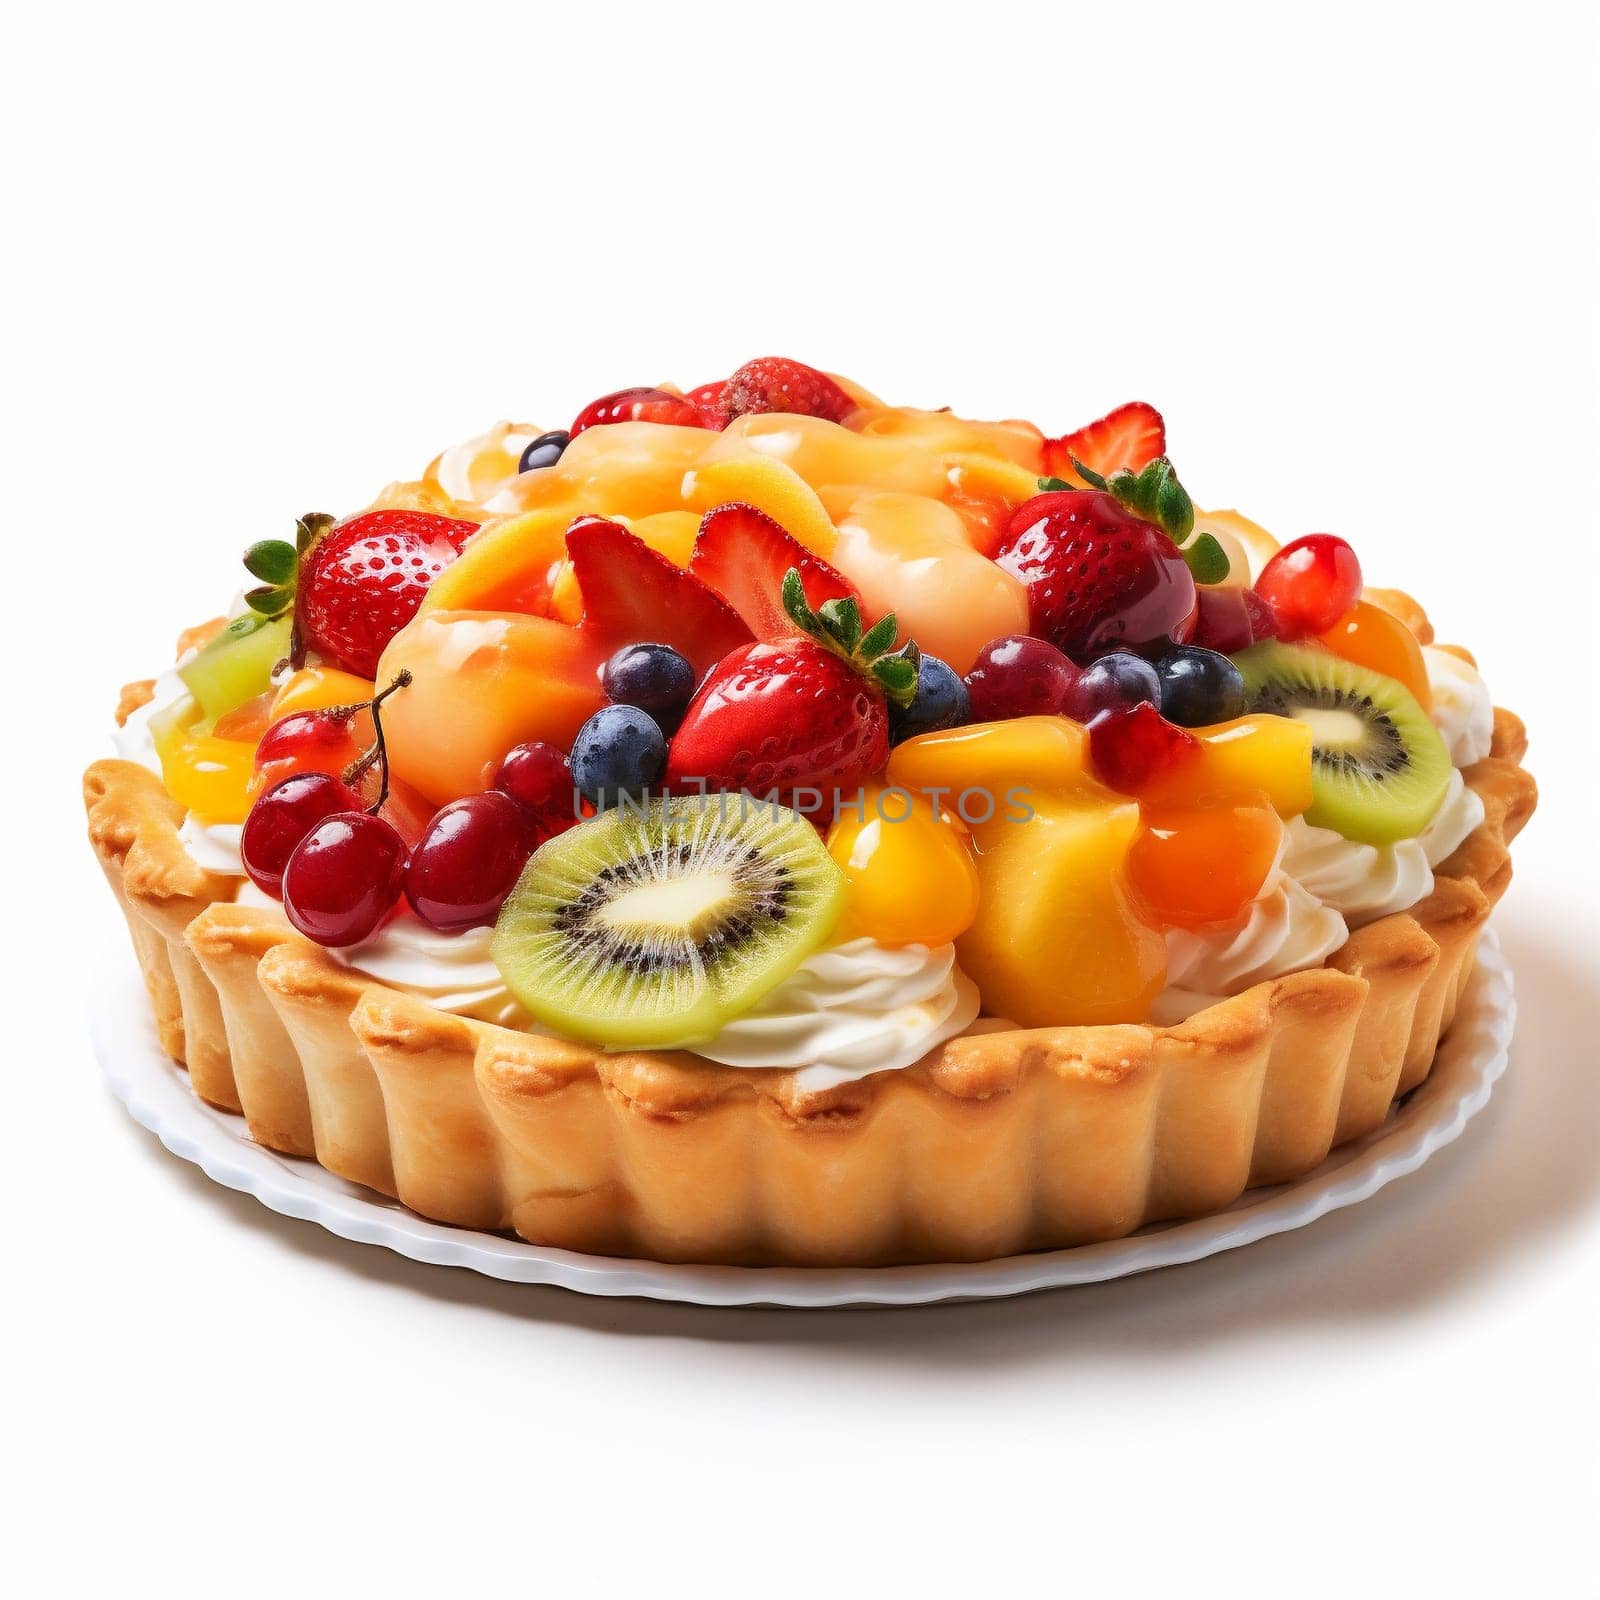 Tasty Fruit Pie on White Background. Fruit Tart with Fresh Fruits and Berries, Strawberry, Blueberry, Peach, Kiwi, Raspberry, Lingonberry, Red Currant, Black Currant.